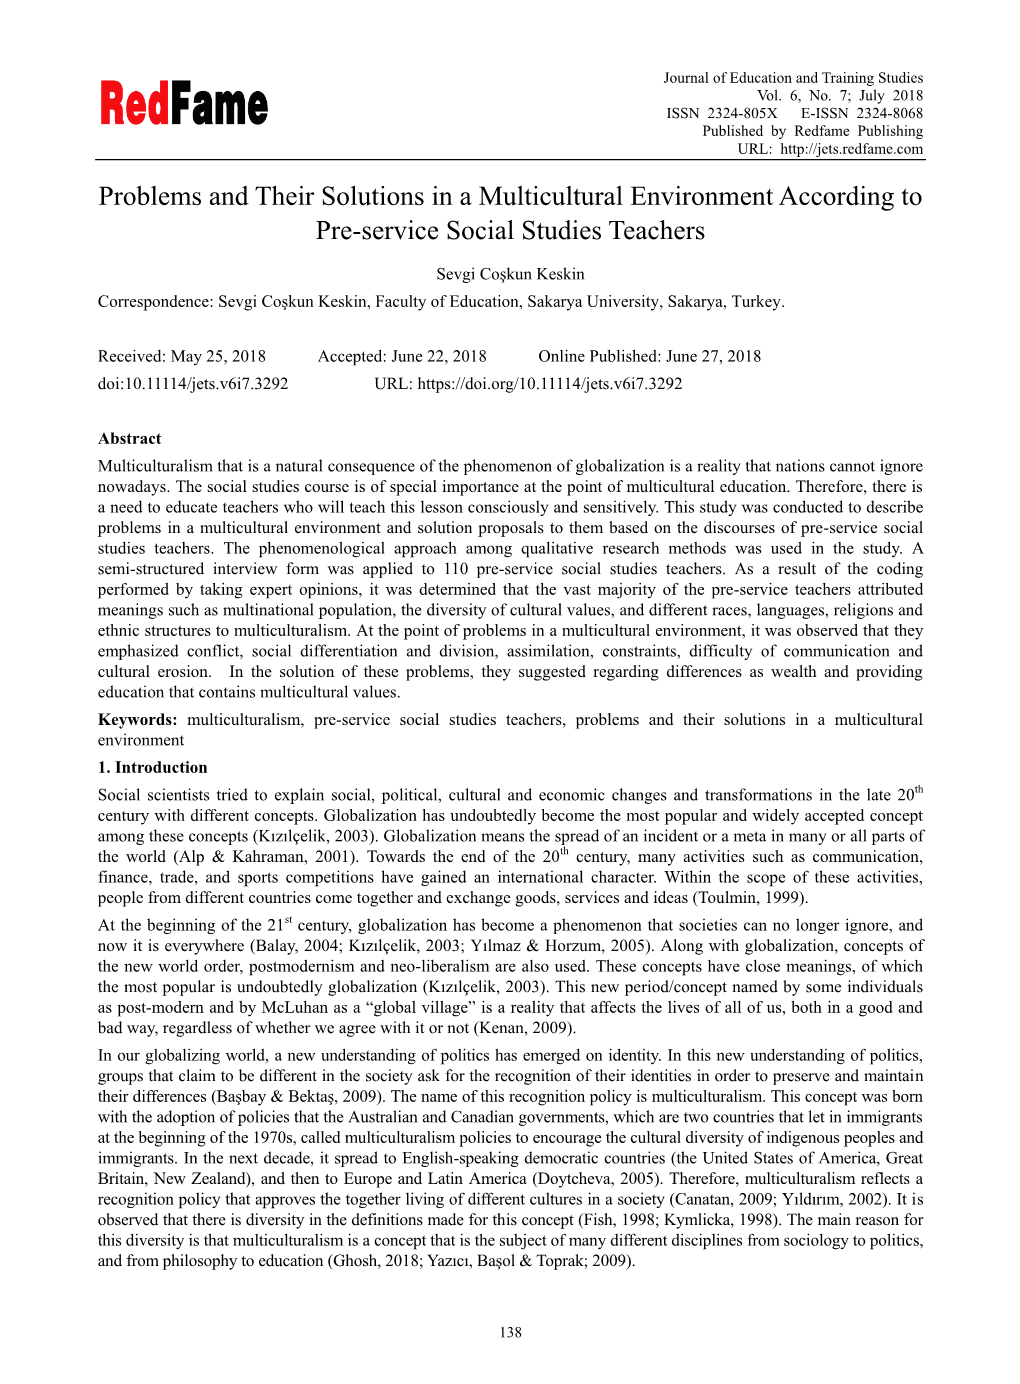 Problems and Their Solutions in a Multicultural Environment According to Pre-Service Social Studies Teachers